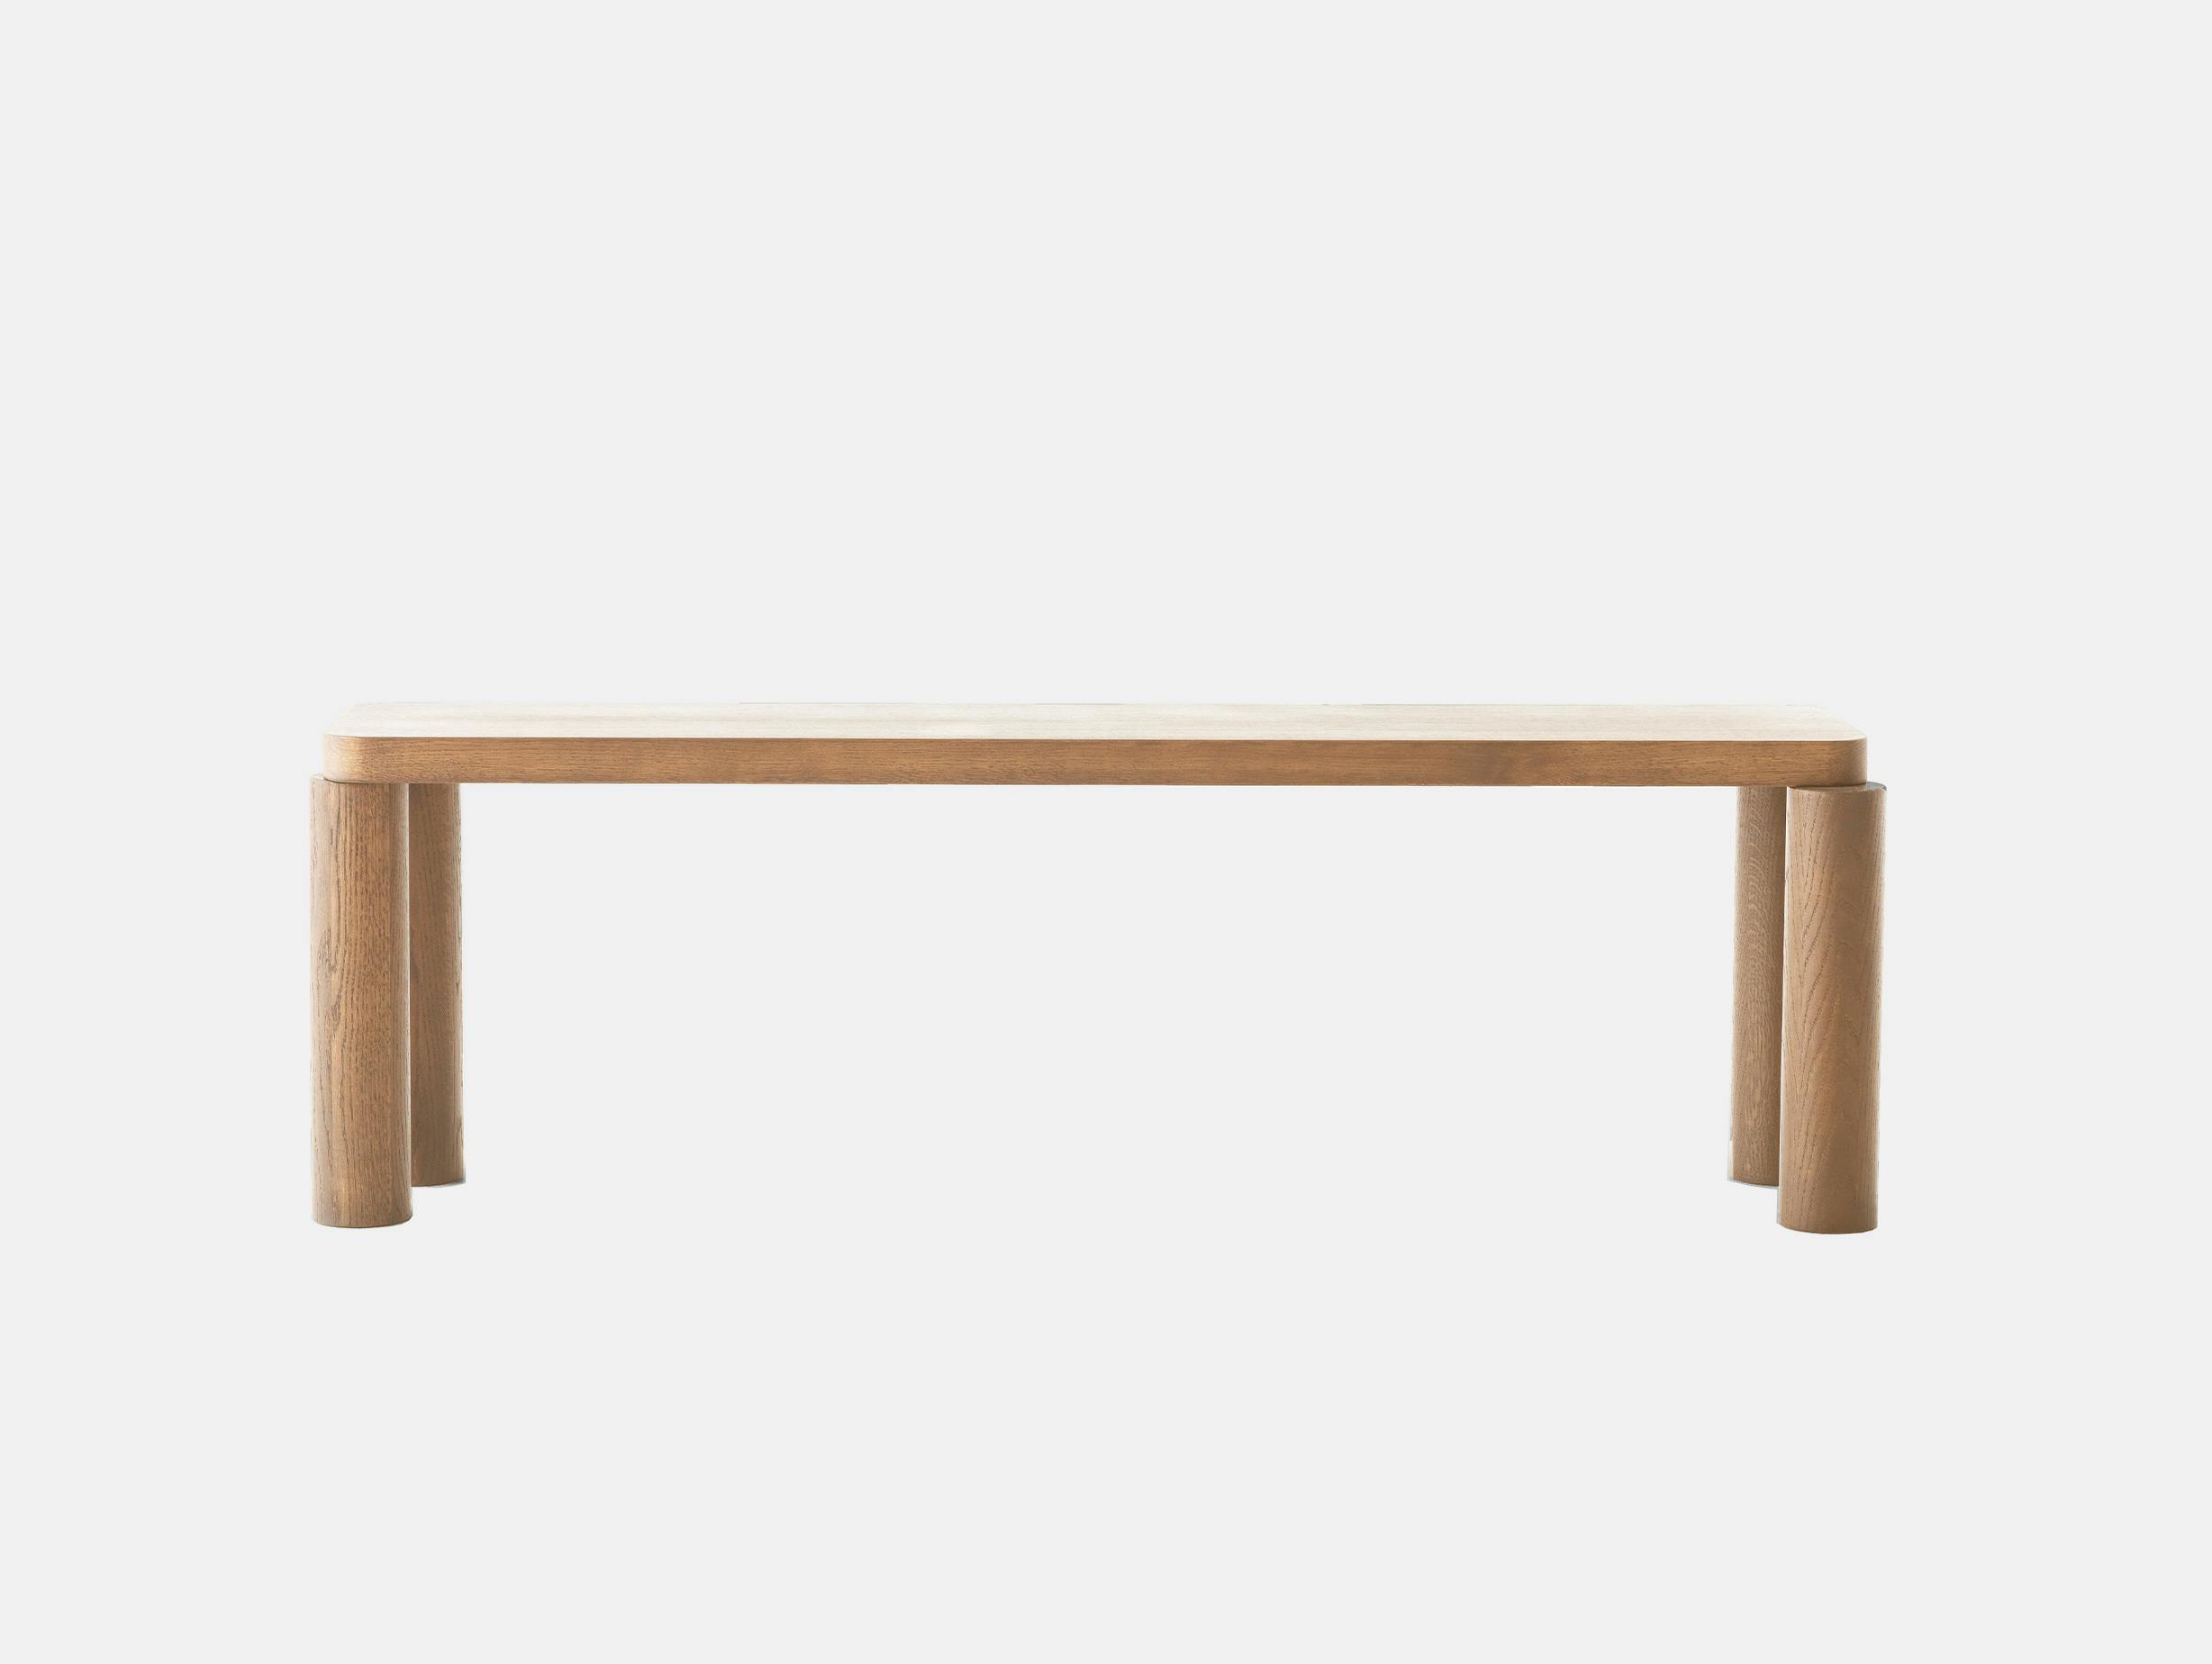 Resident philippe malouin offset bench natural oak